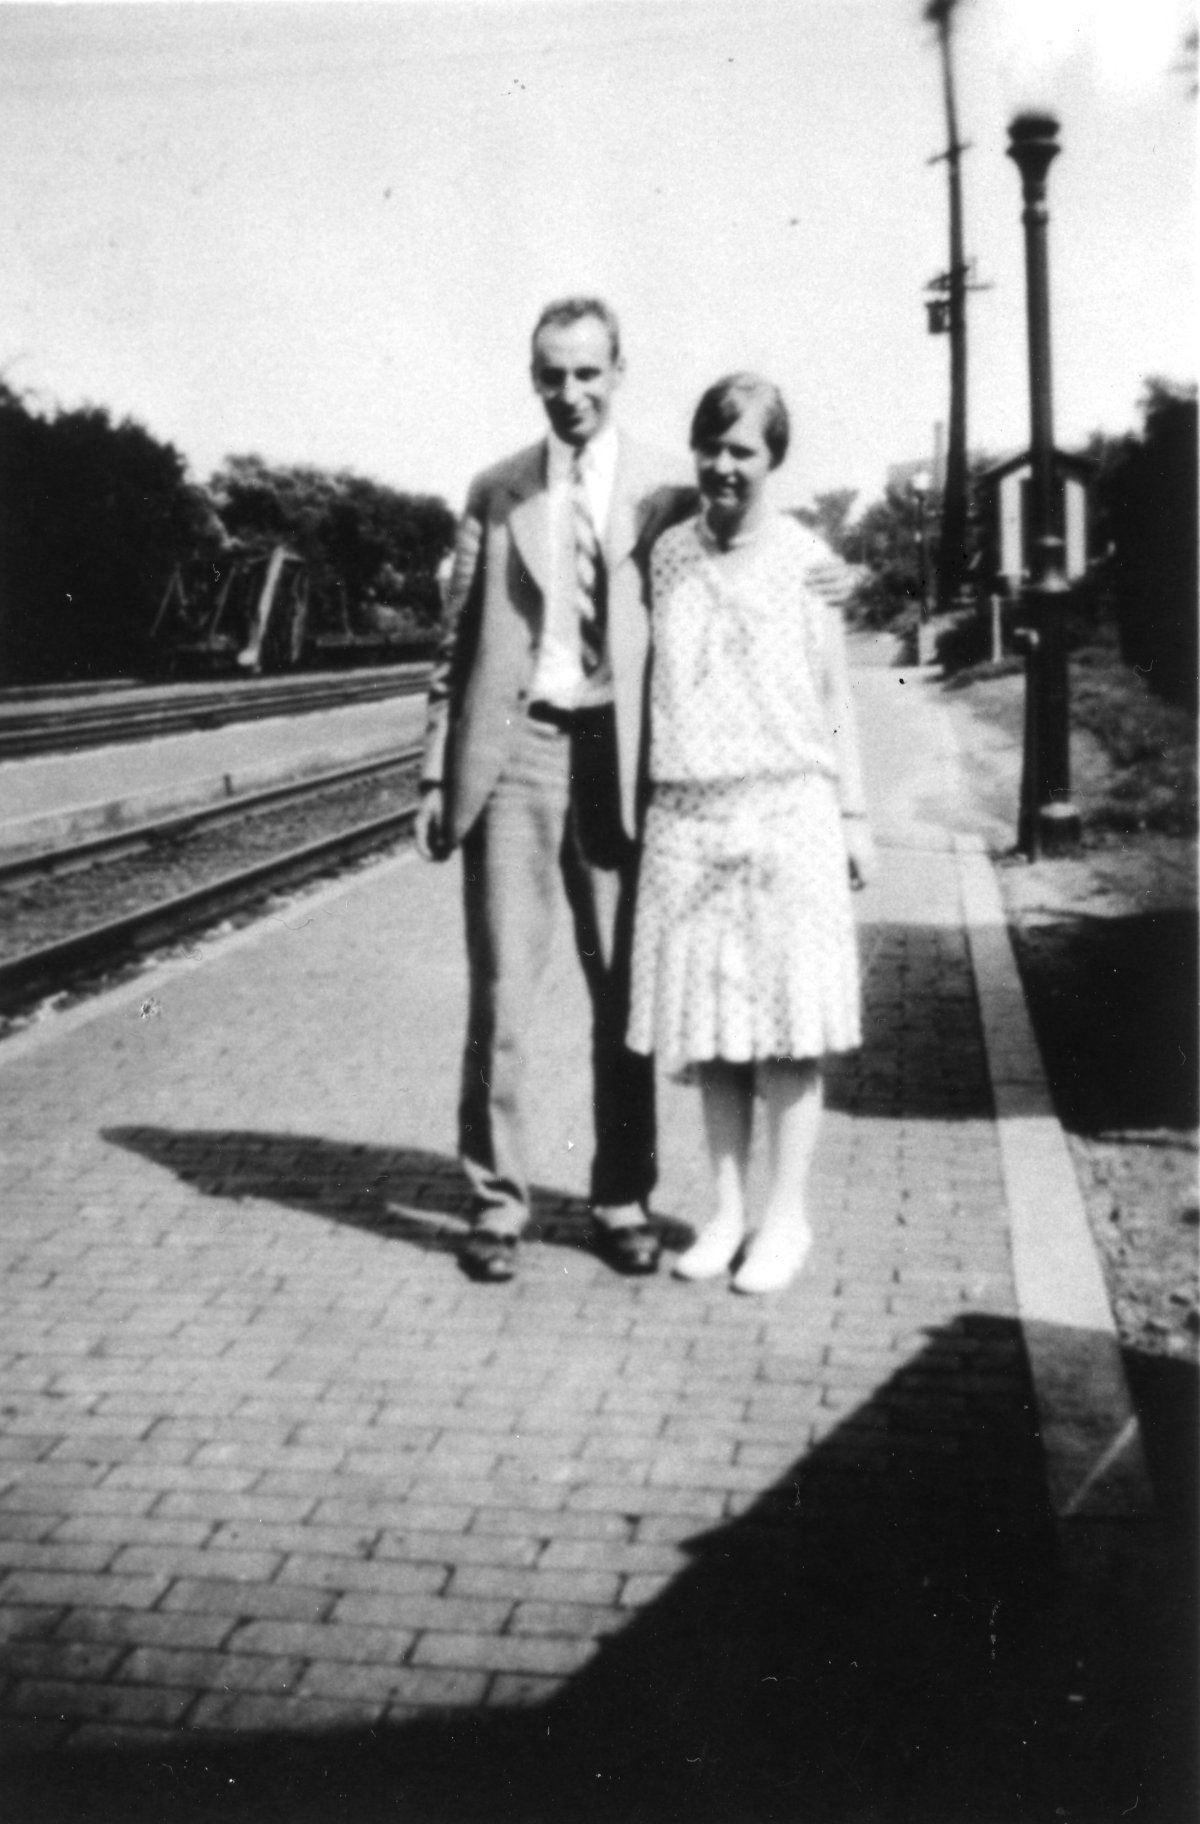 Man and a woman standing outside